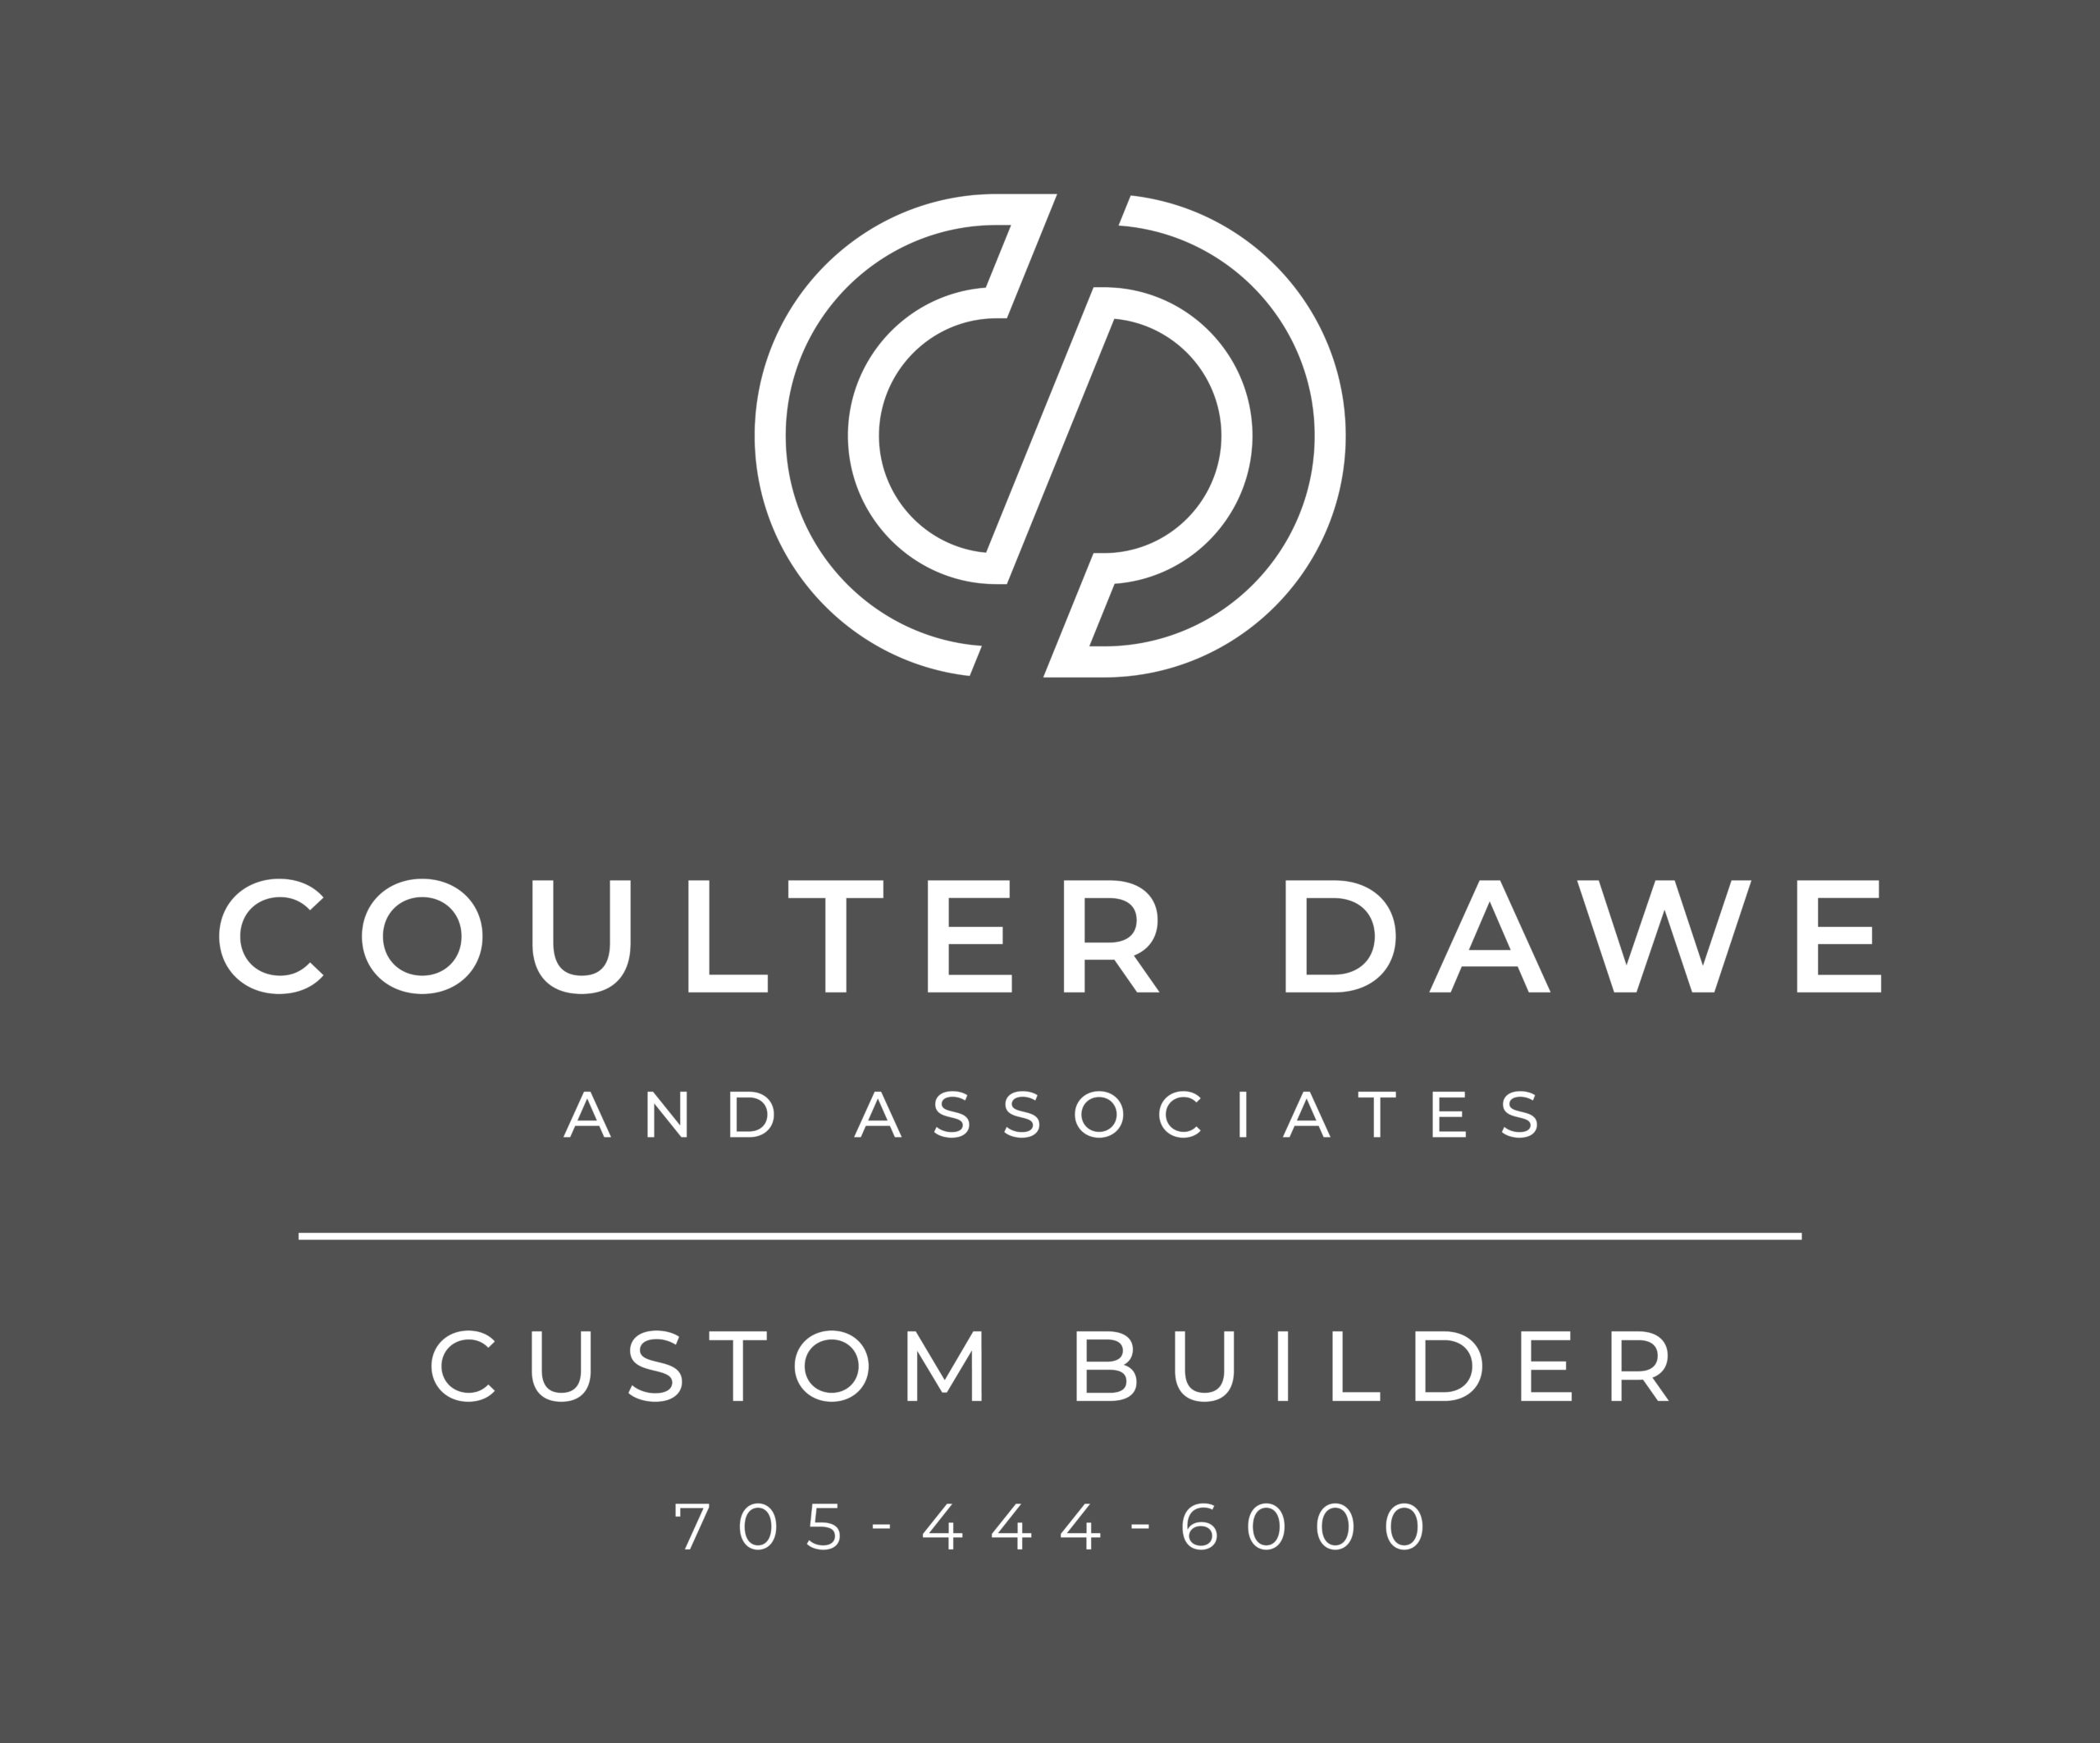 Coulter Dawe and Associates Inc.